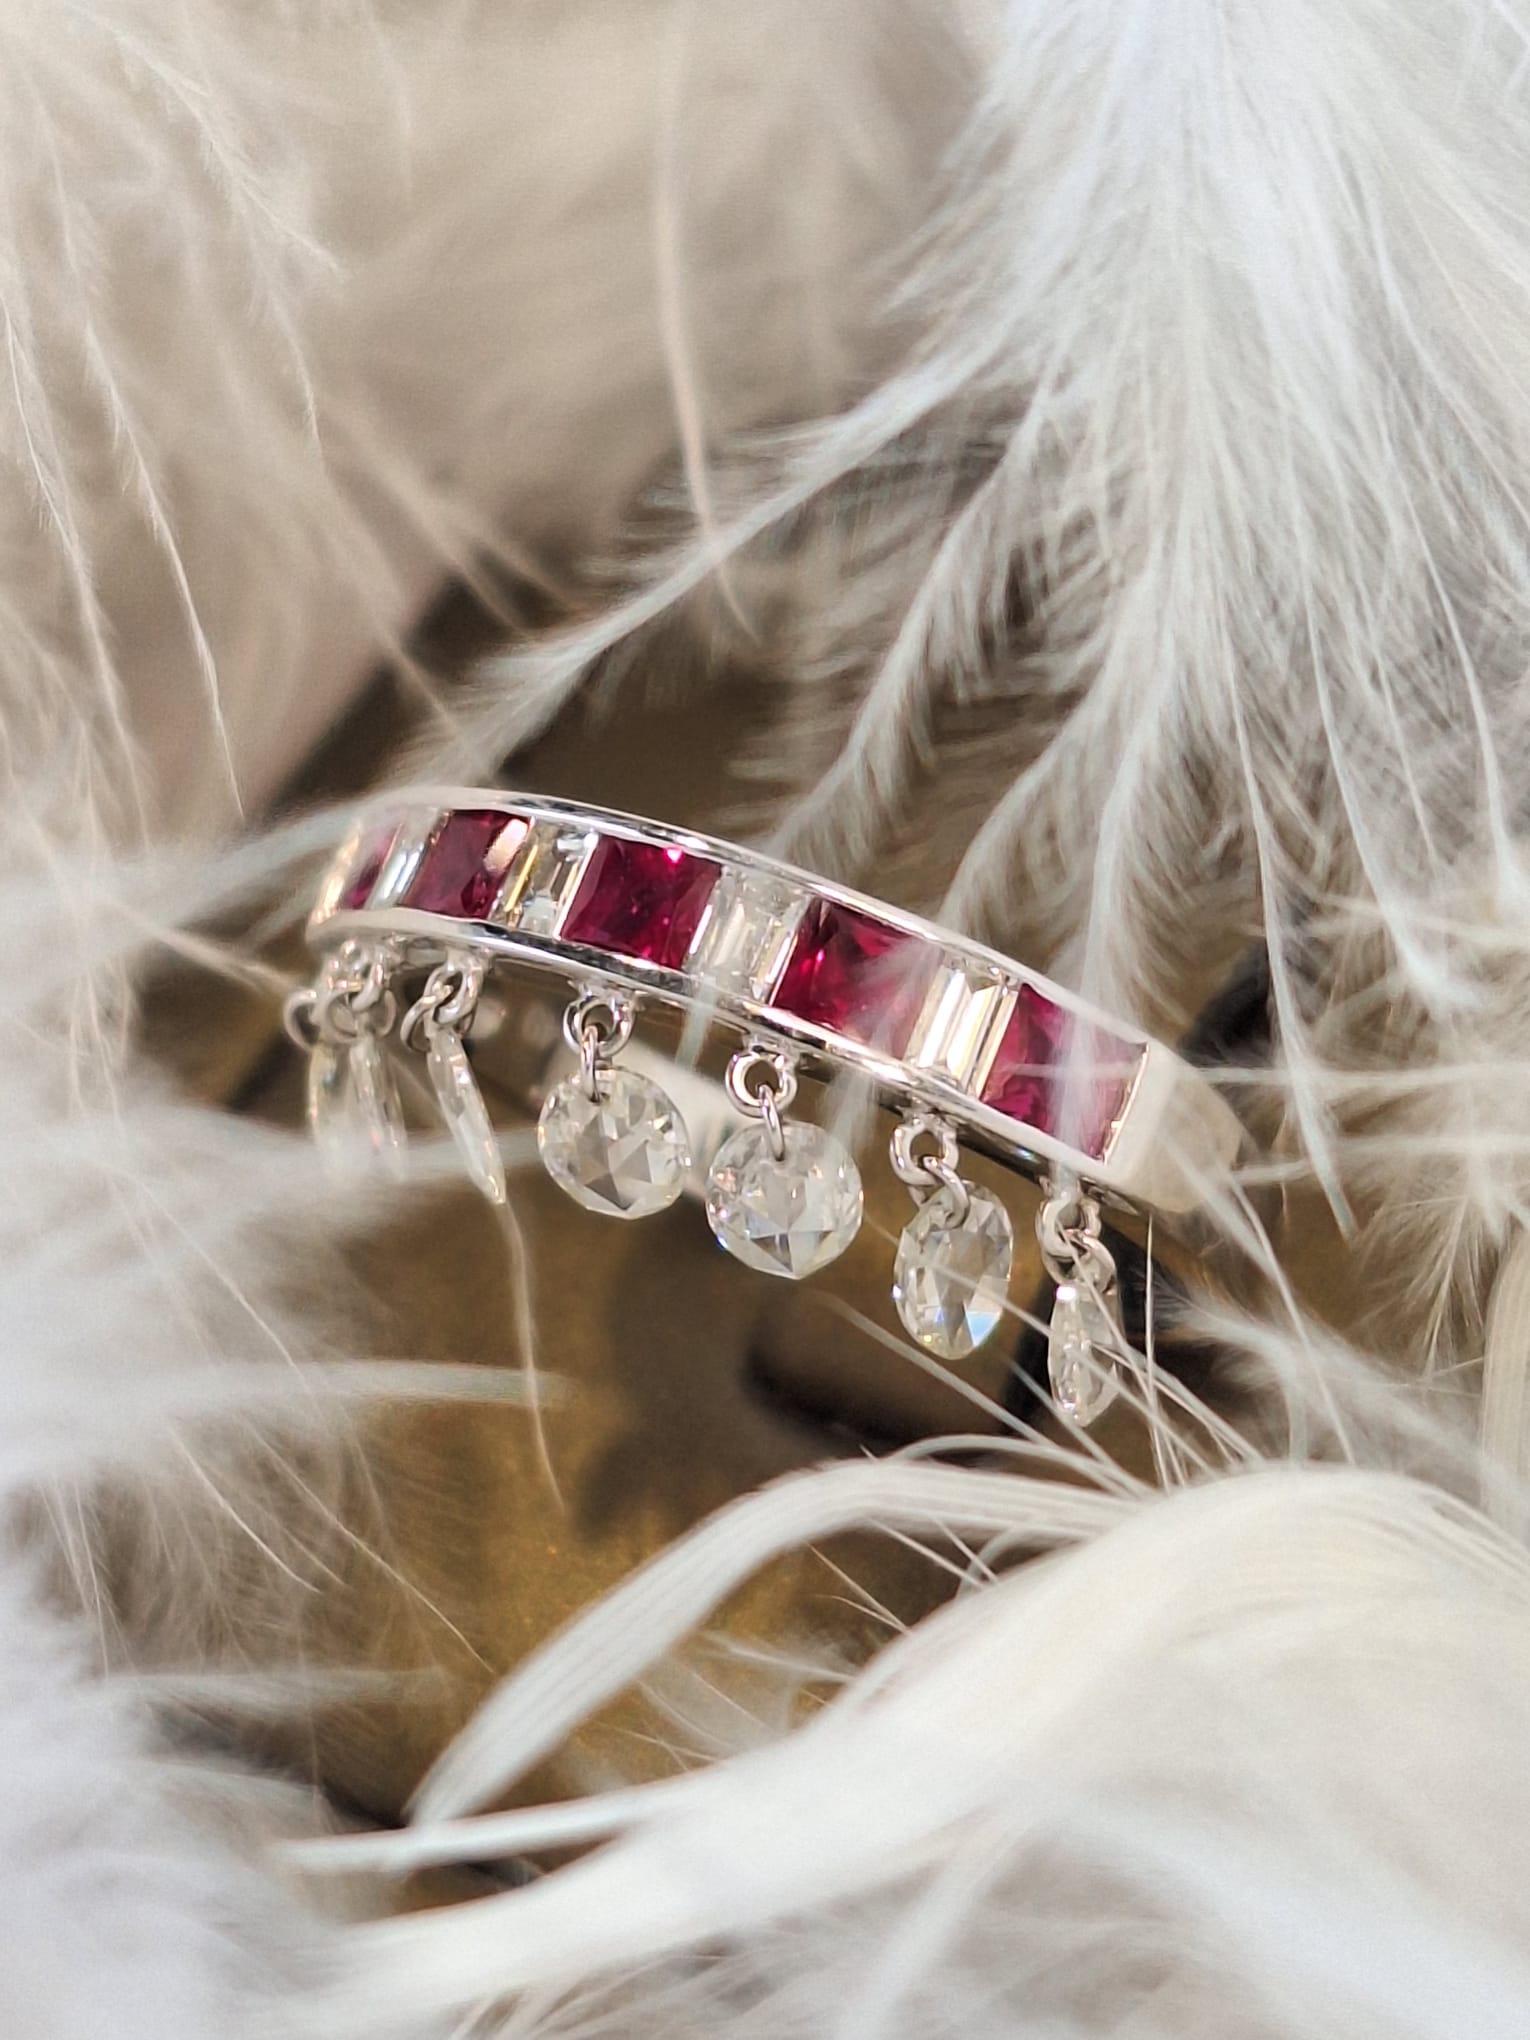 18K White Gold Diamond Ring with Ruby

Ruby is a stone of passion, protection, and prosperity, symbolizing the sun and imbued with an intense life force that wards off negativity and psychic attacks.

Diamonds symbolise clarity and purity, also